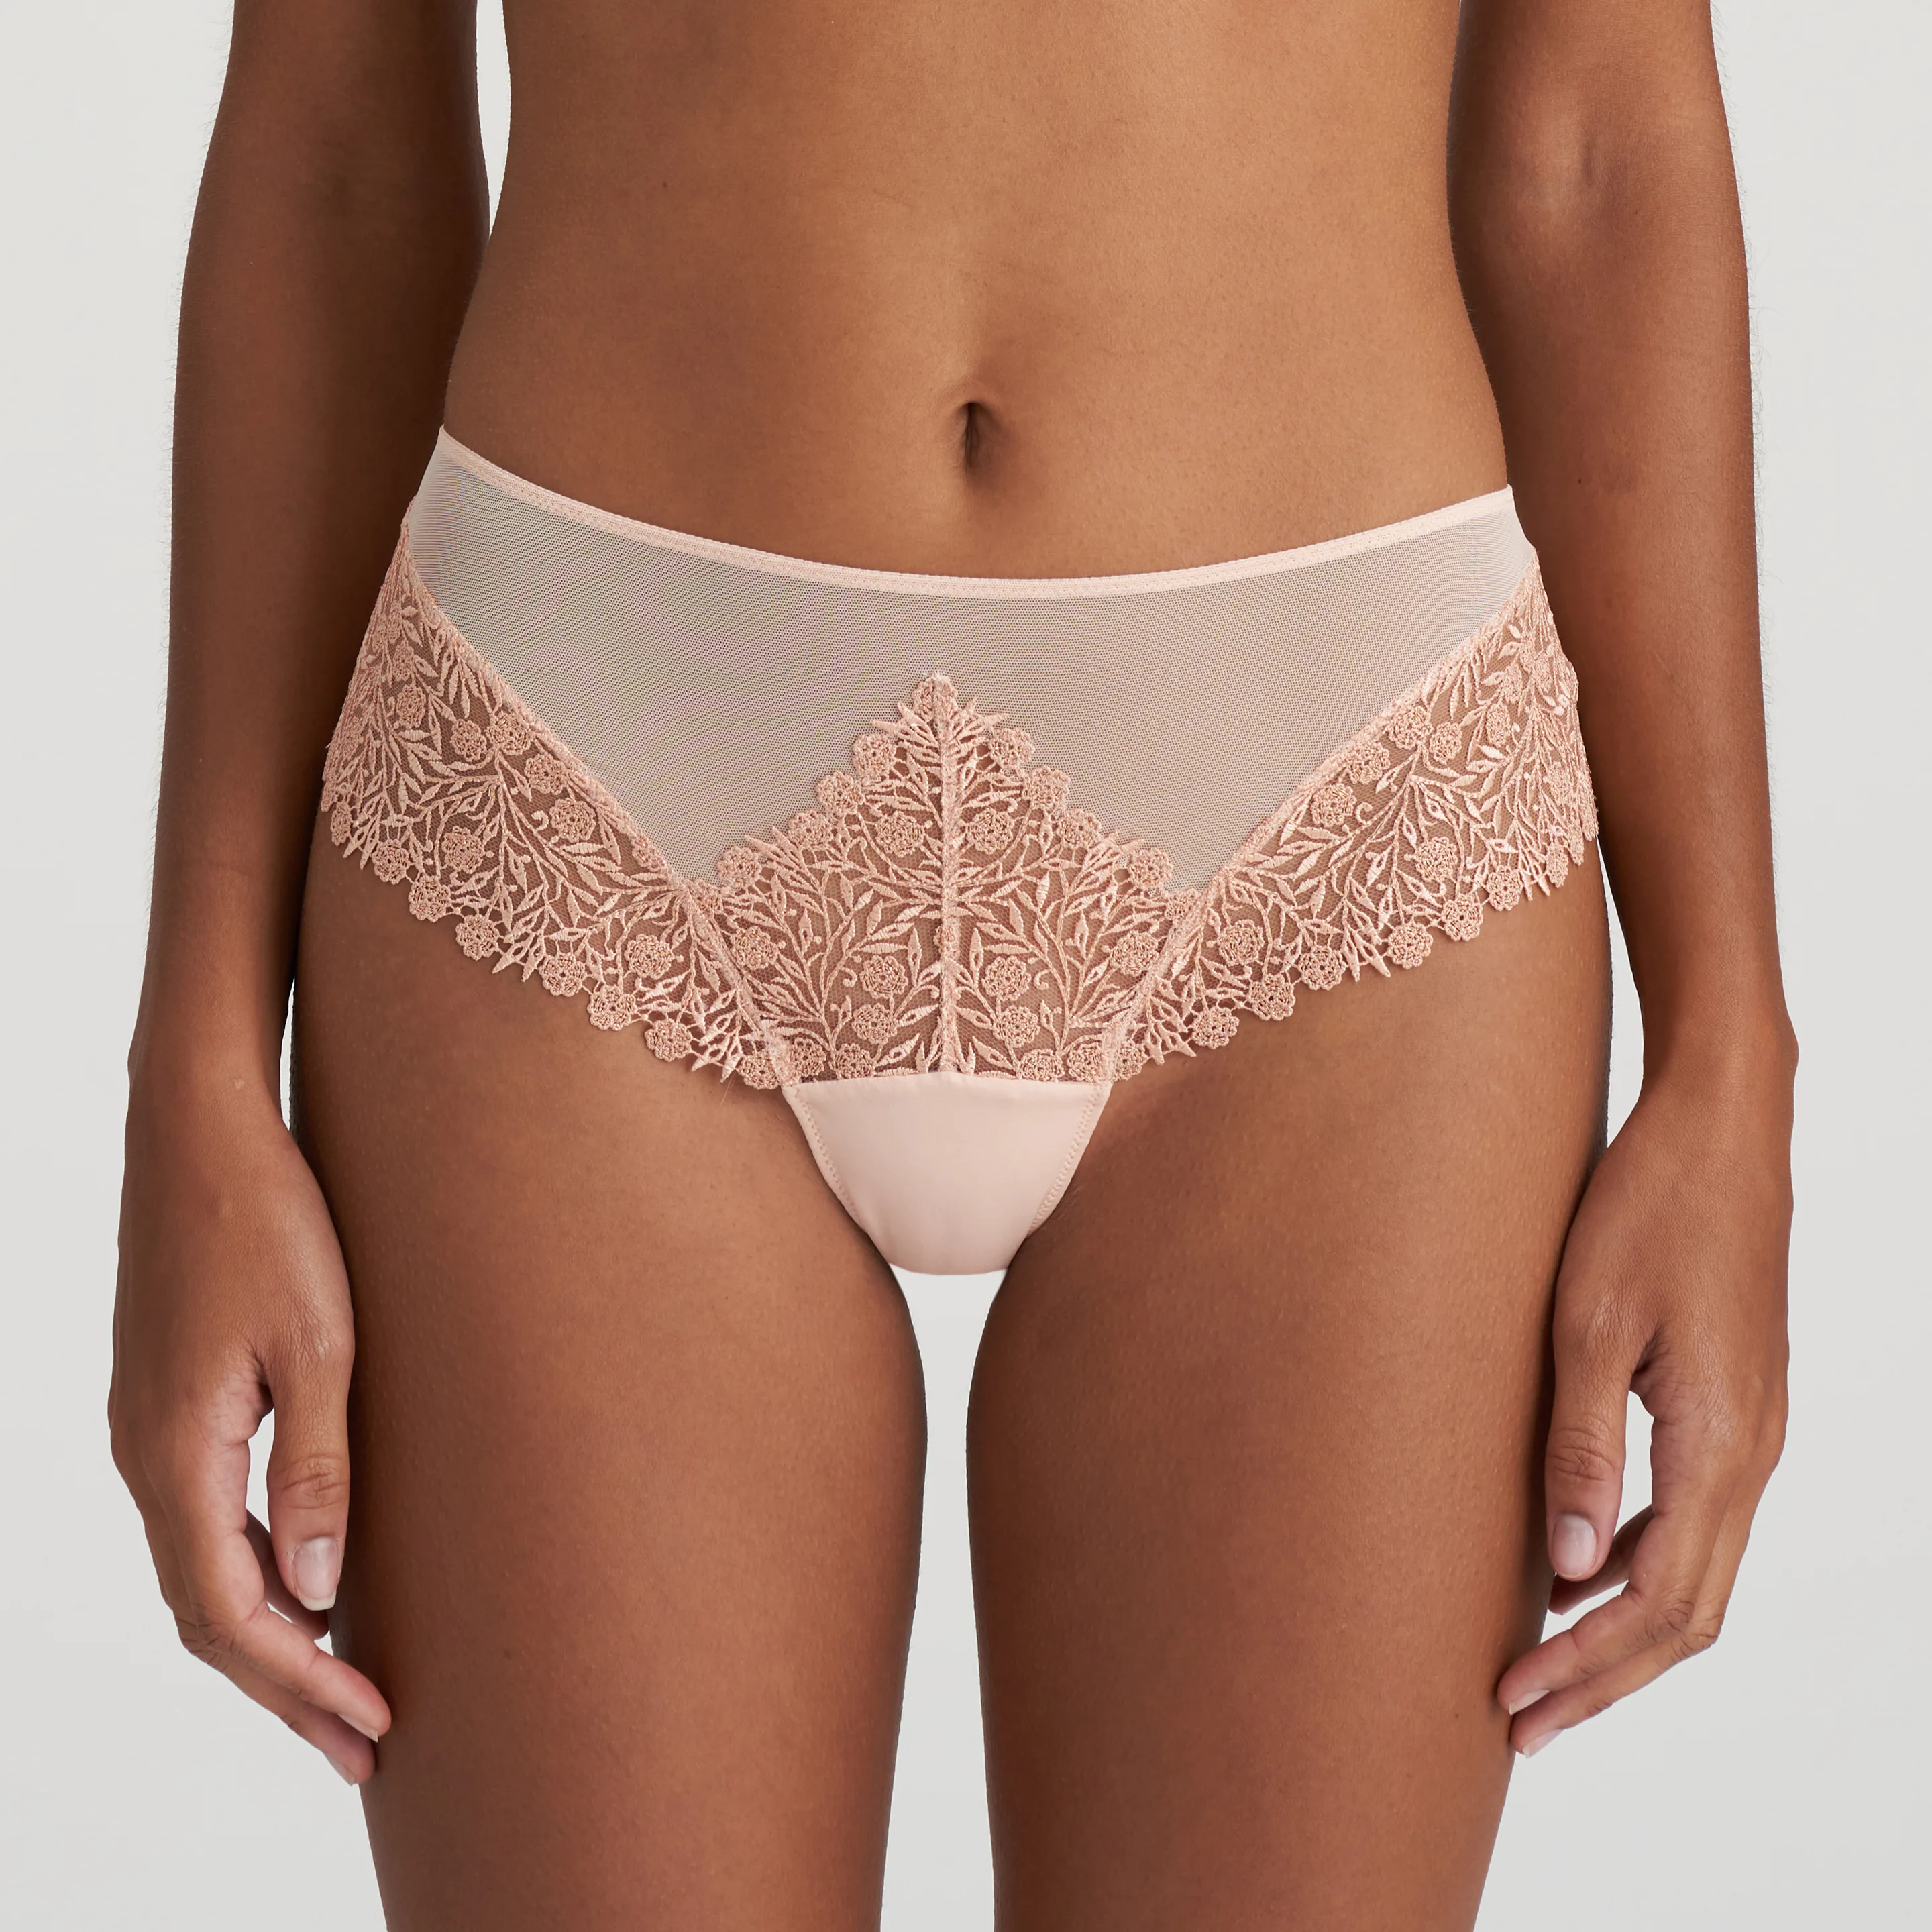 Marie Jo collection: elegant lingerie with a hint of lace